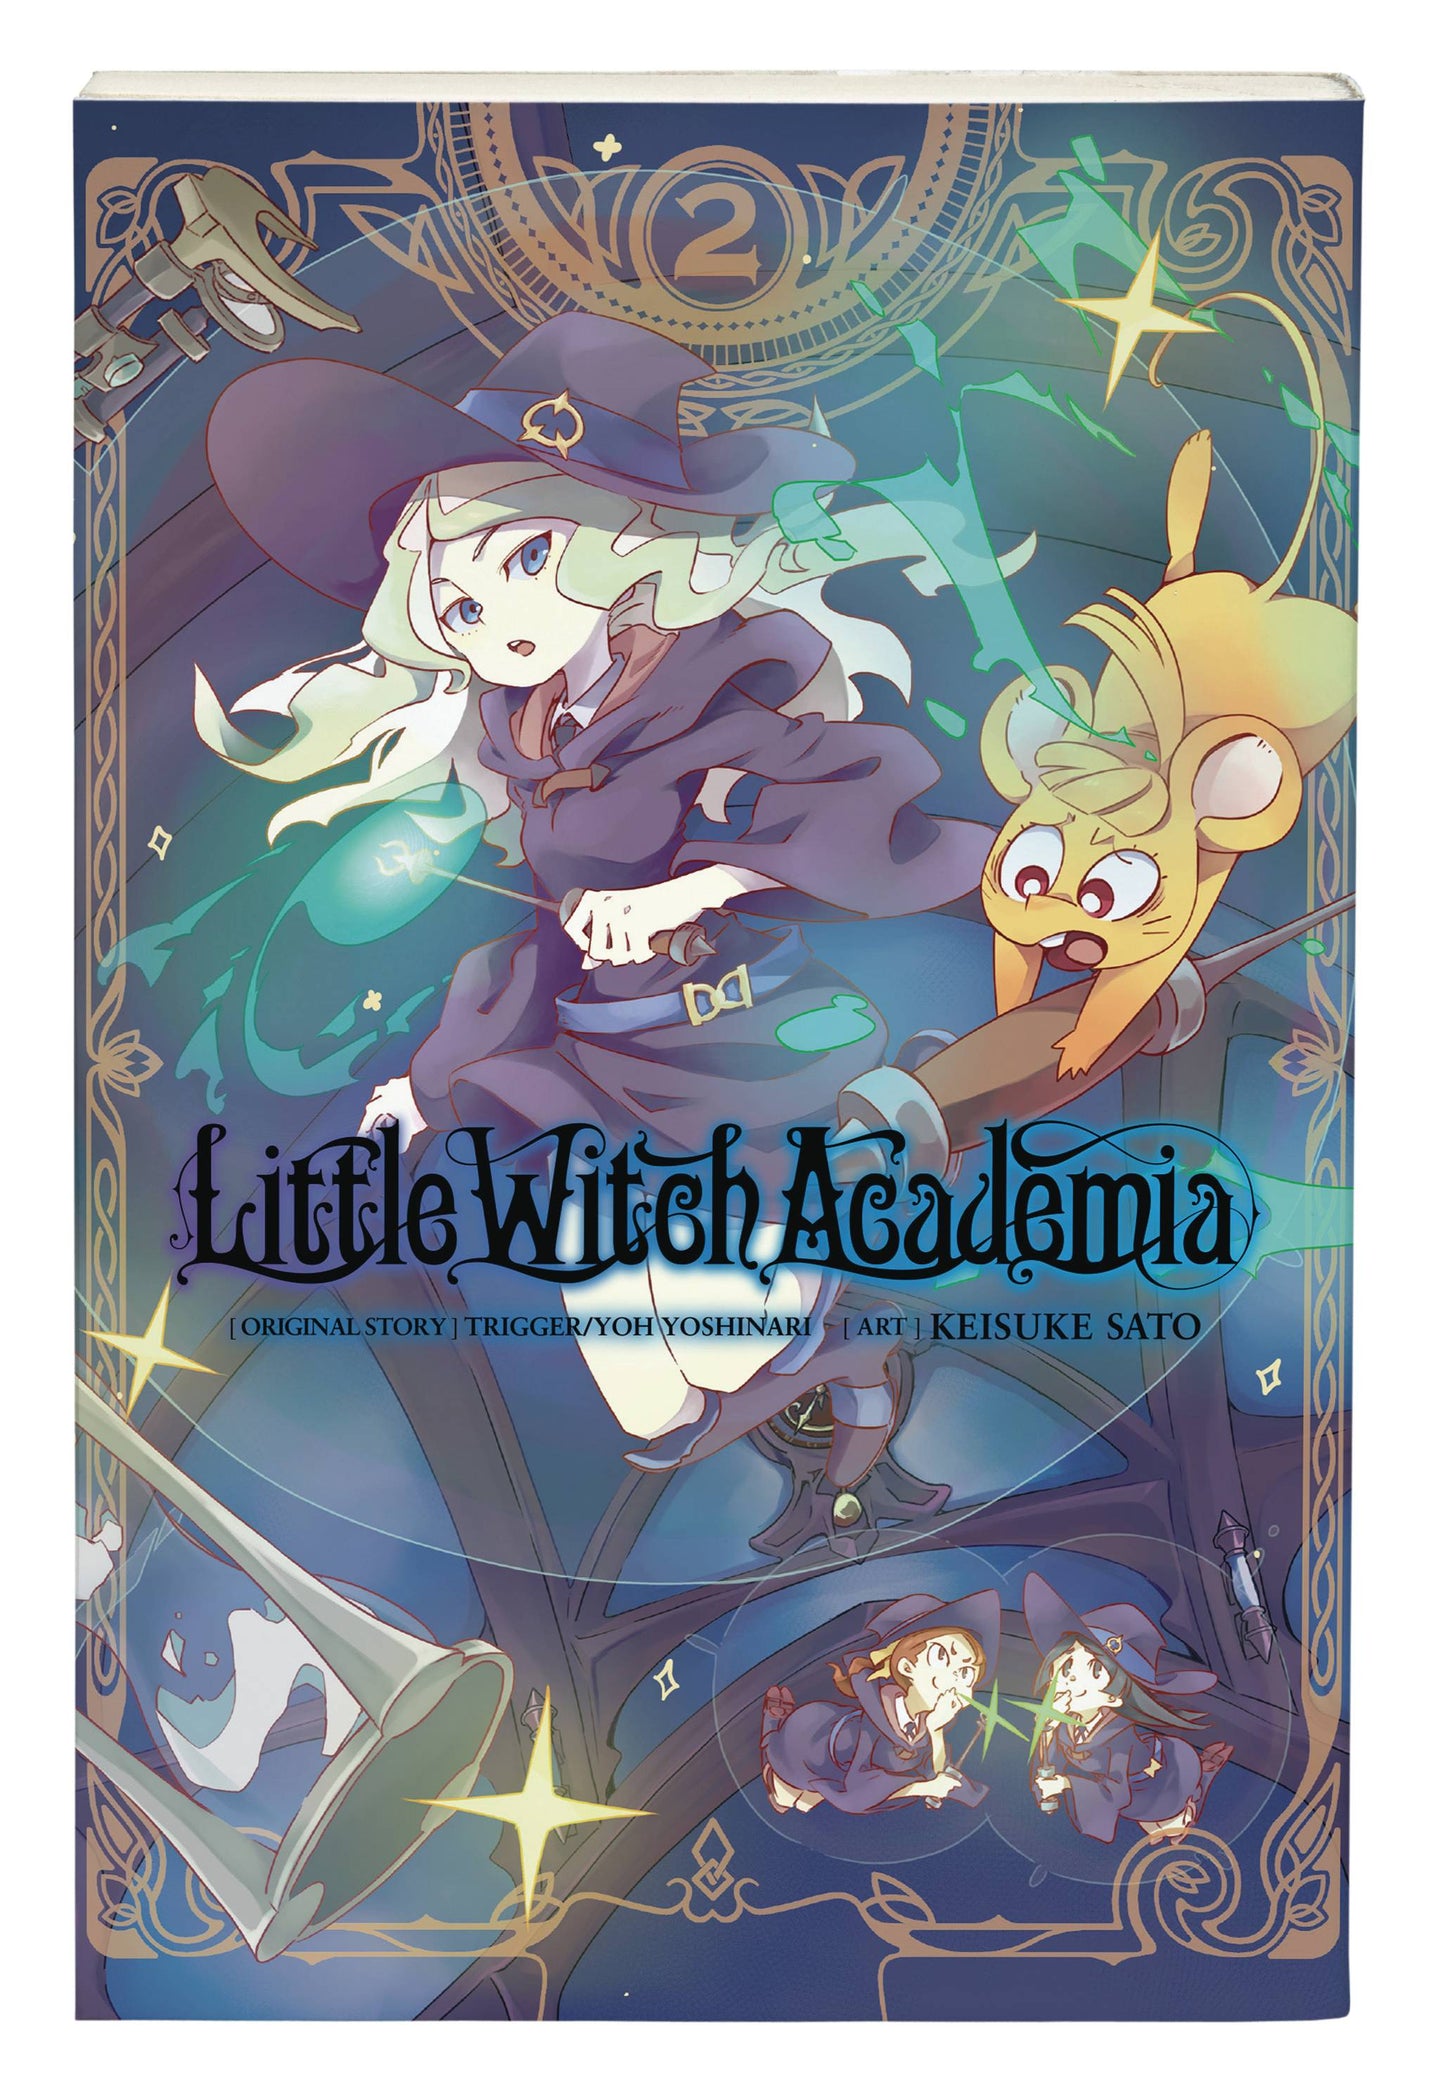 LITTLE WITCH ACADEMIA GN VOL 02 (C: 0-1-2)